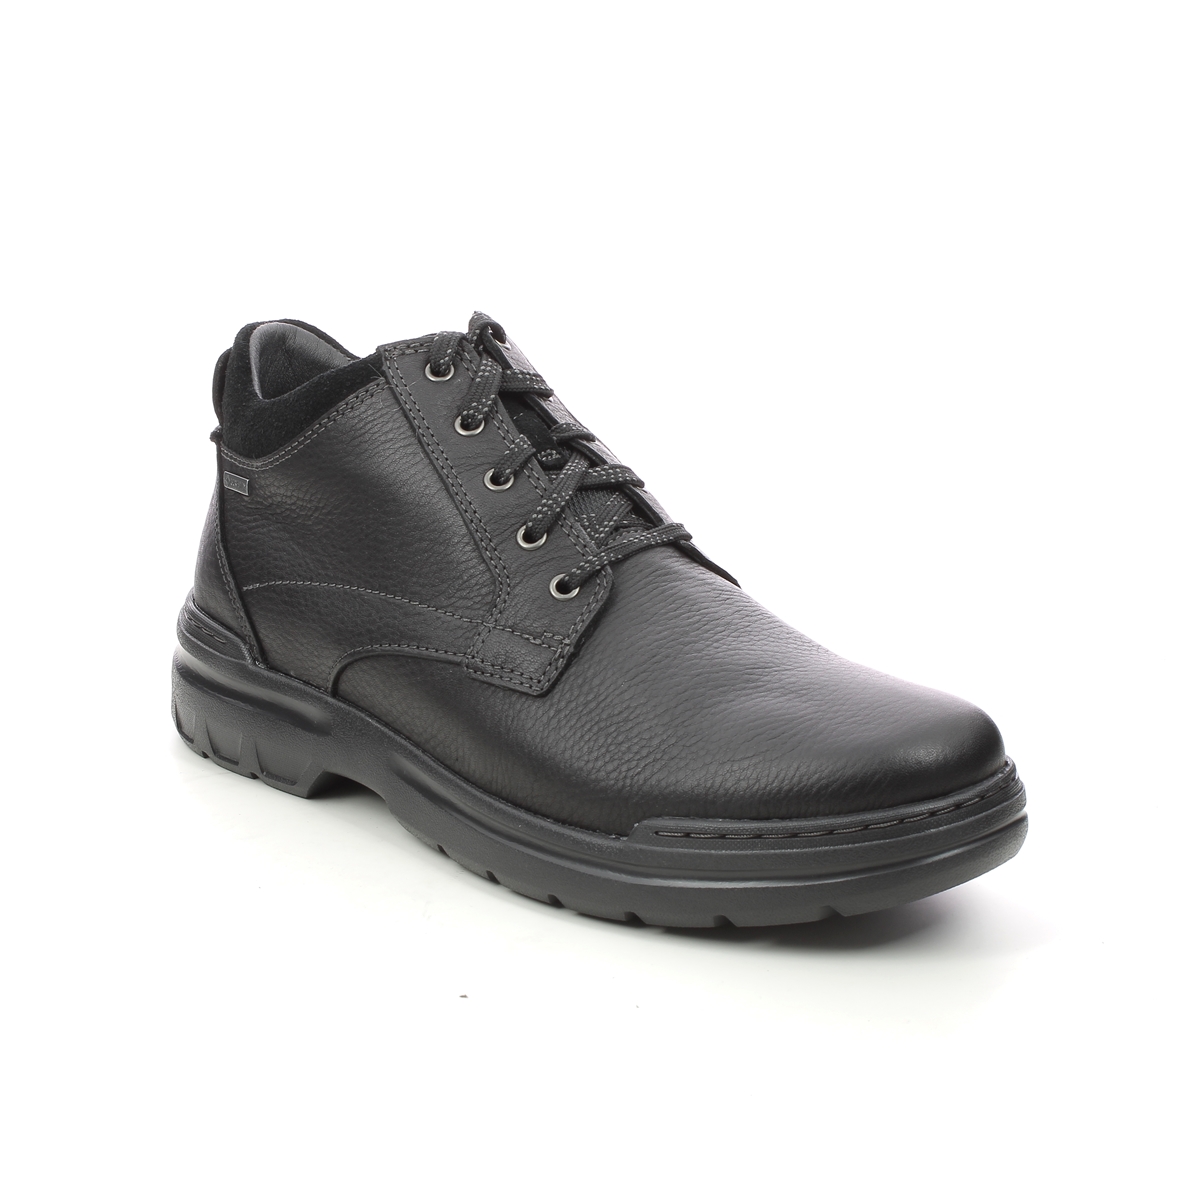 Clarks Rockie 2 Up Gtx Black Leather Mens Boots 612568H In Size 8 In Plain Black Leather H Width Fitting Extra Wide